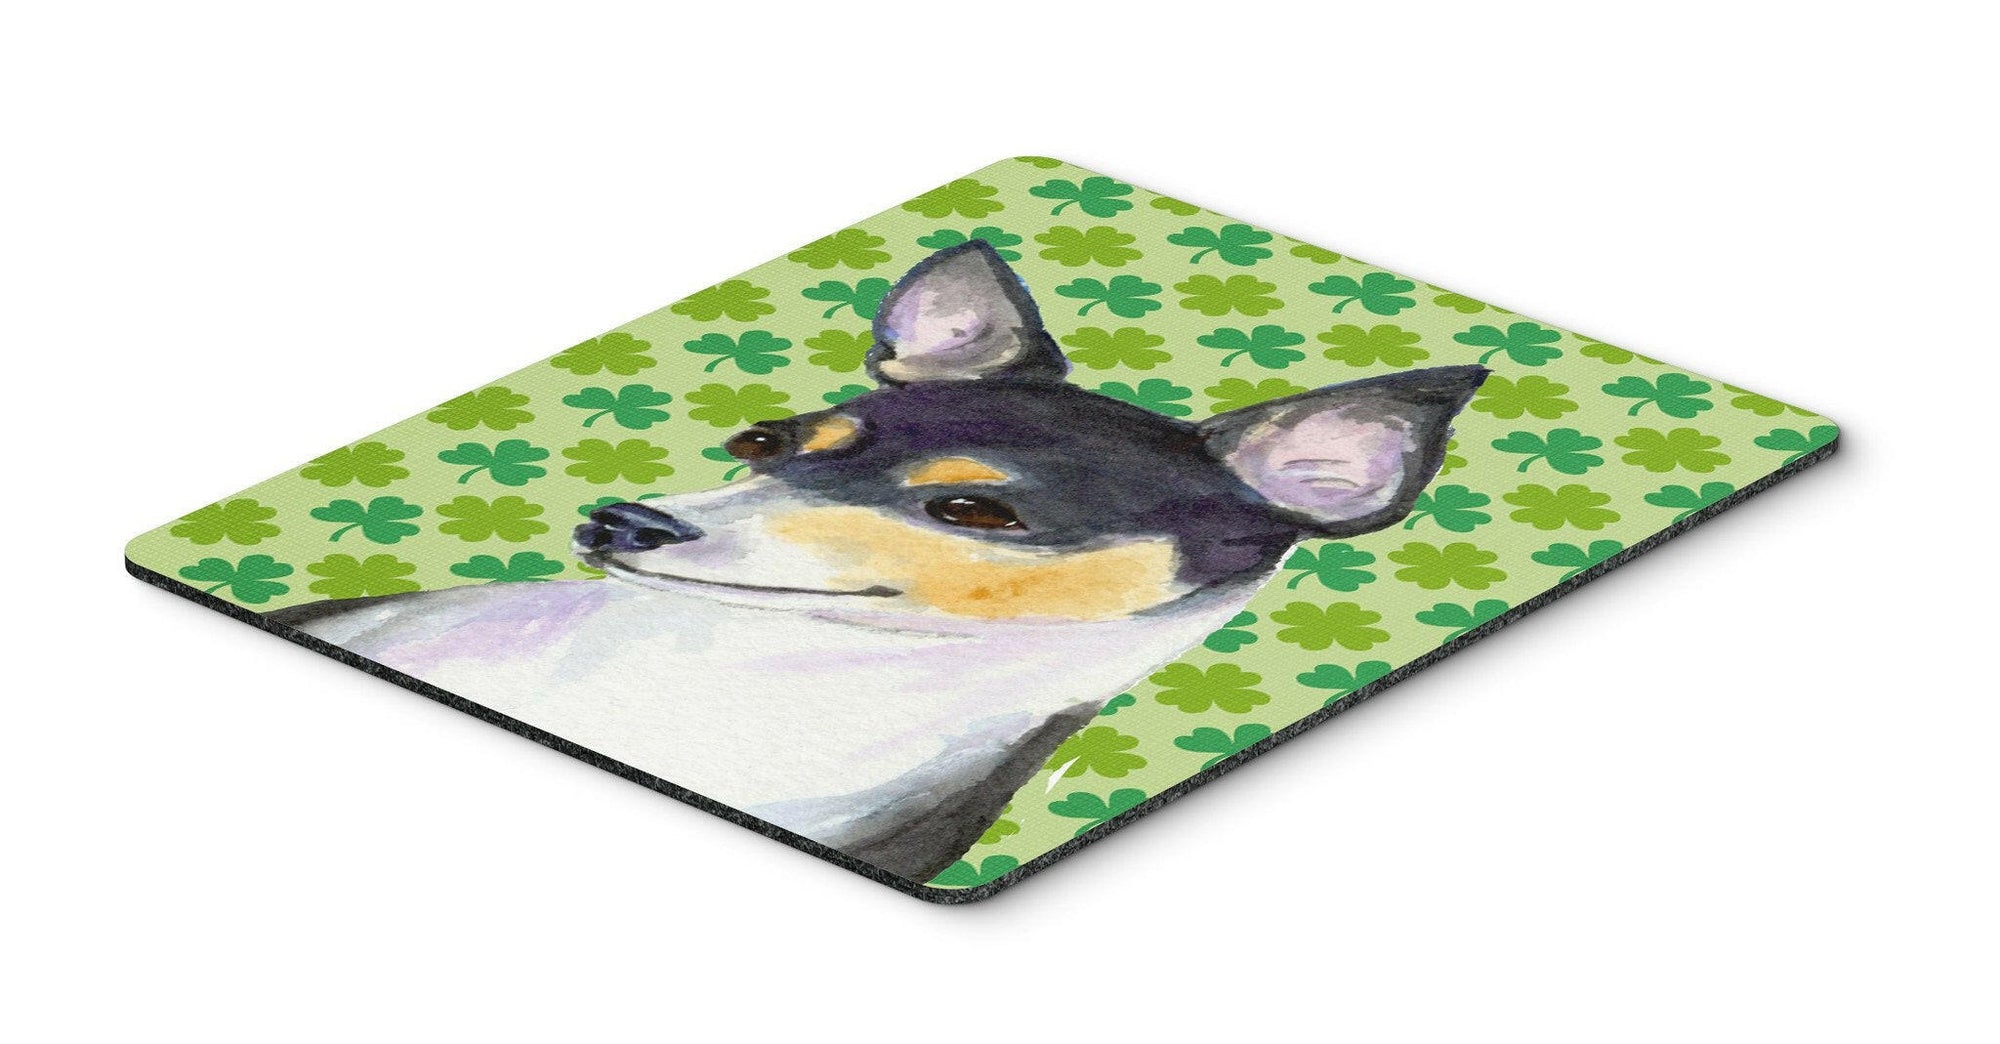 Chihuahua St. Patrick's Day Shamrock Portrait Mouse Pad, Hot Pad or Trivet by Caroline's Treasures